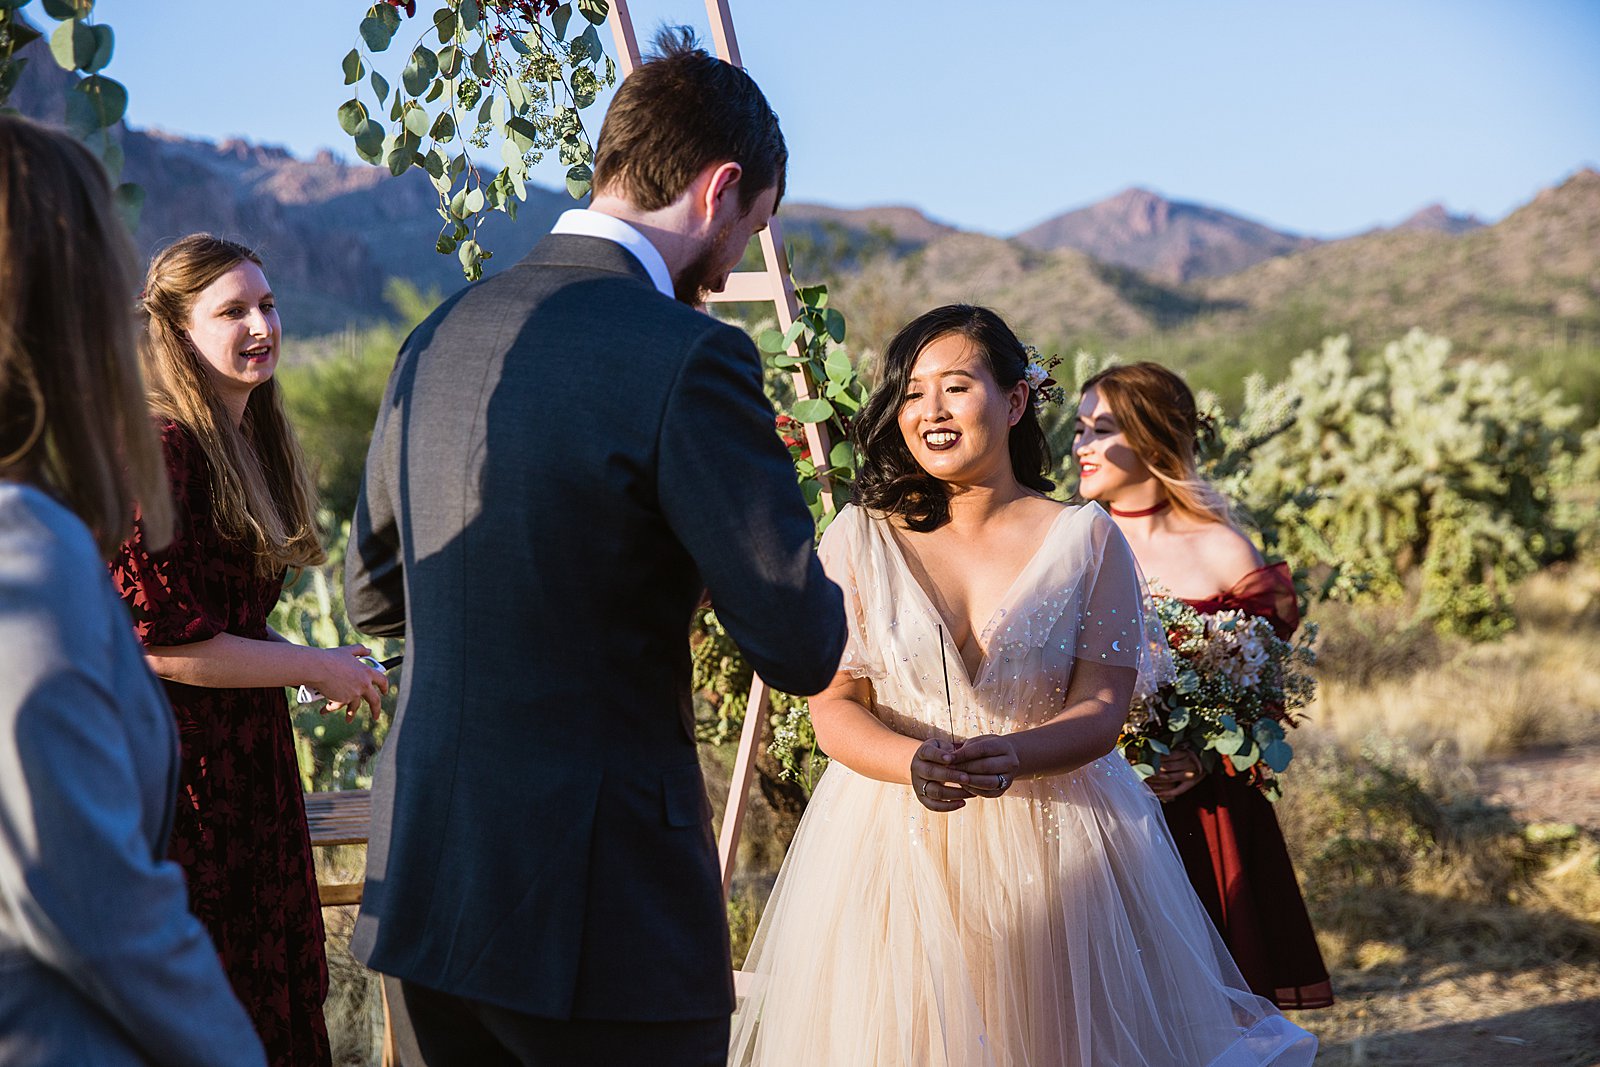 Bride and Groom light a sparkler for their unity ceremony during their wedding ceremony at the Superstition Mountains by Arizona wedding photographer PMA Photography.